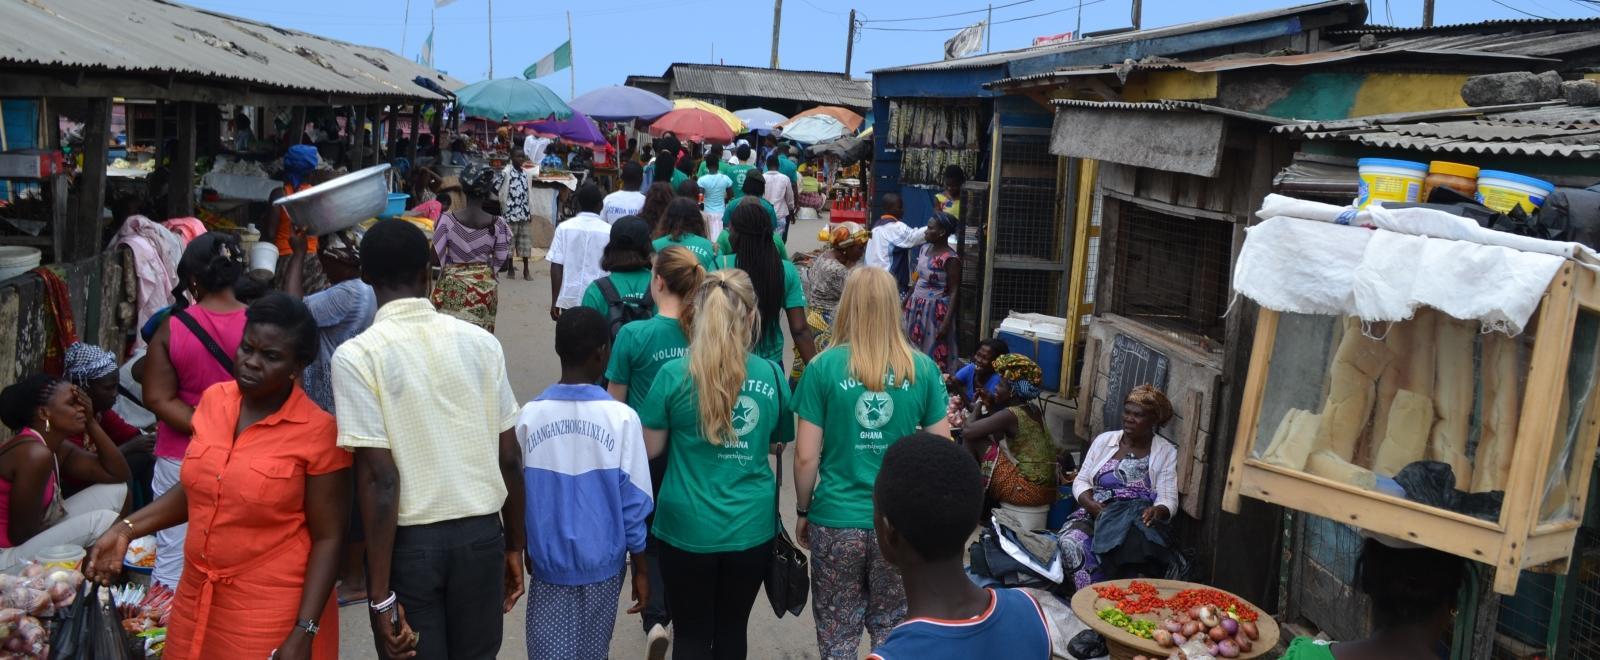 A Projects Abroad group visits a local community during their Human Rights internships in Ghana.